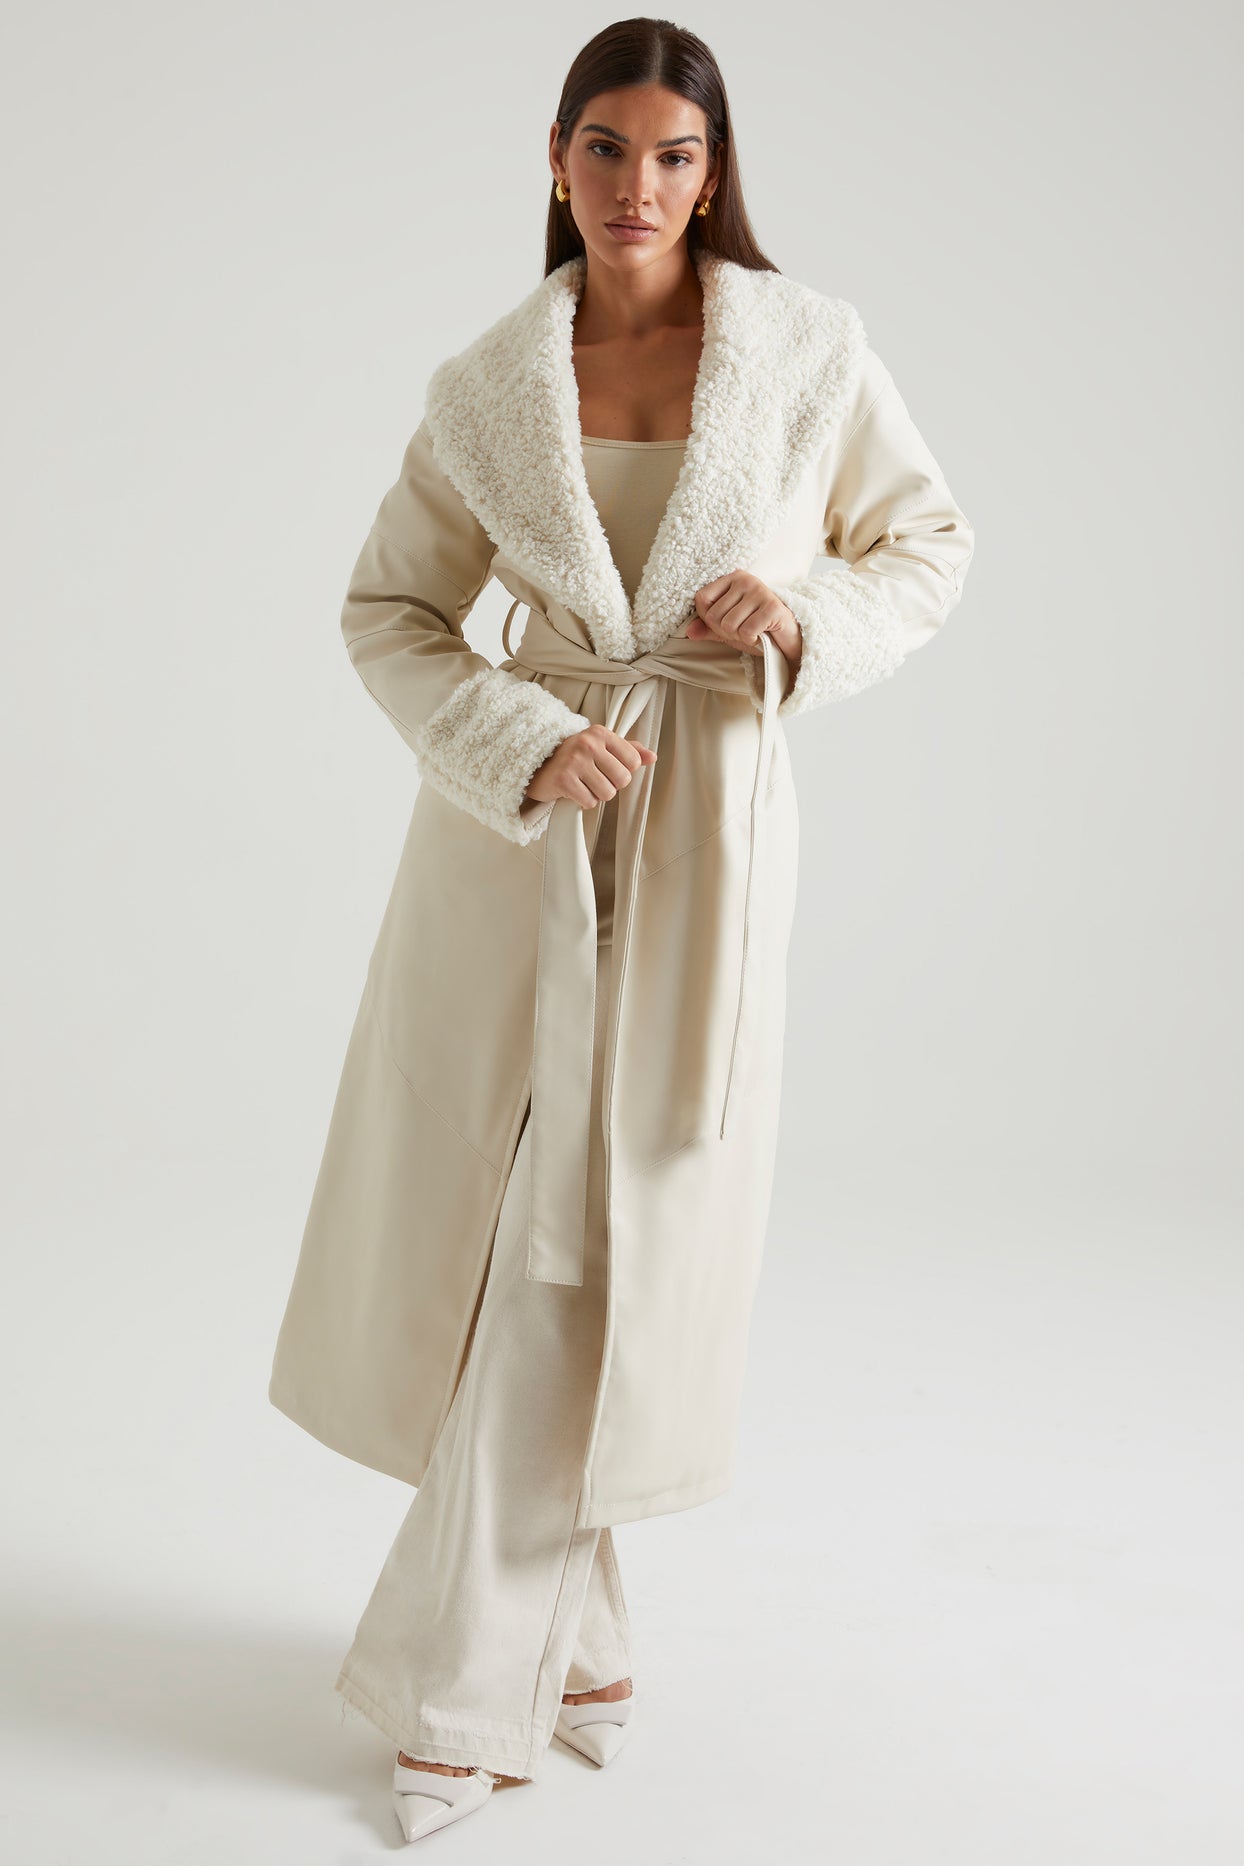 Tie Up Coat with Shearling Collar and Cuffs in Cream